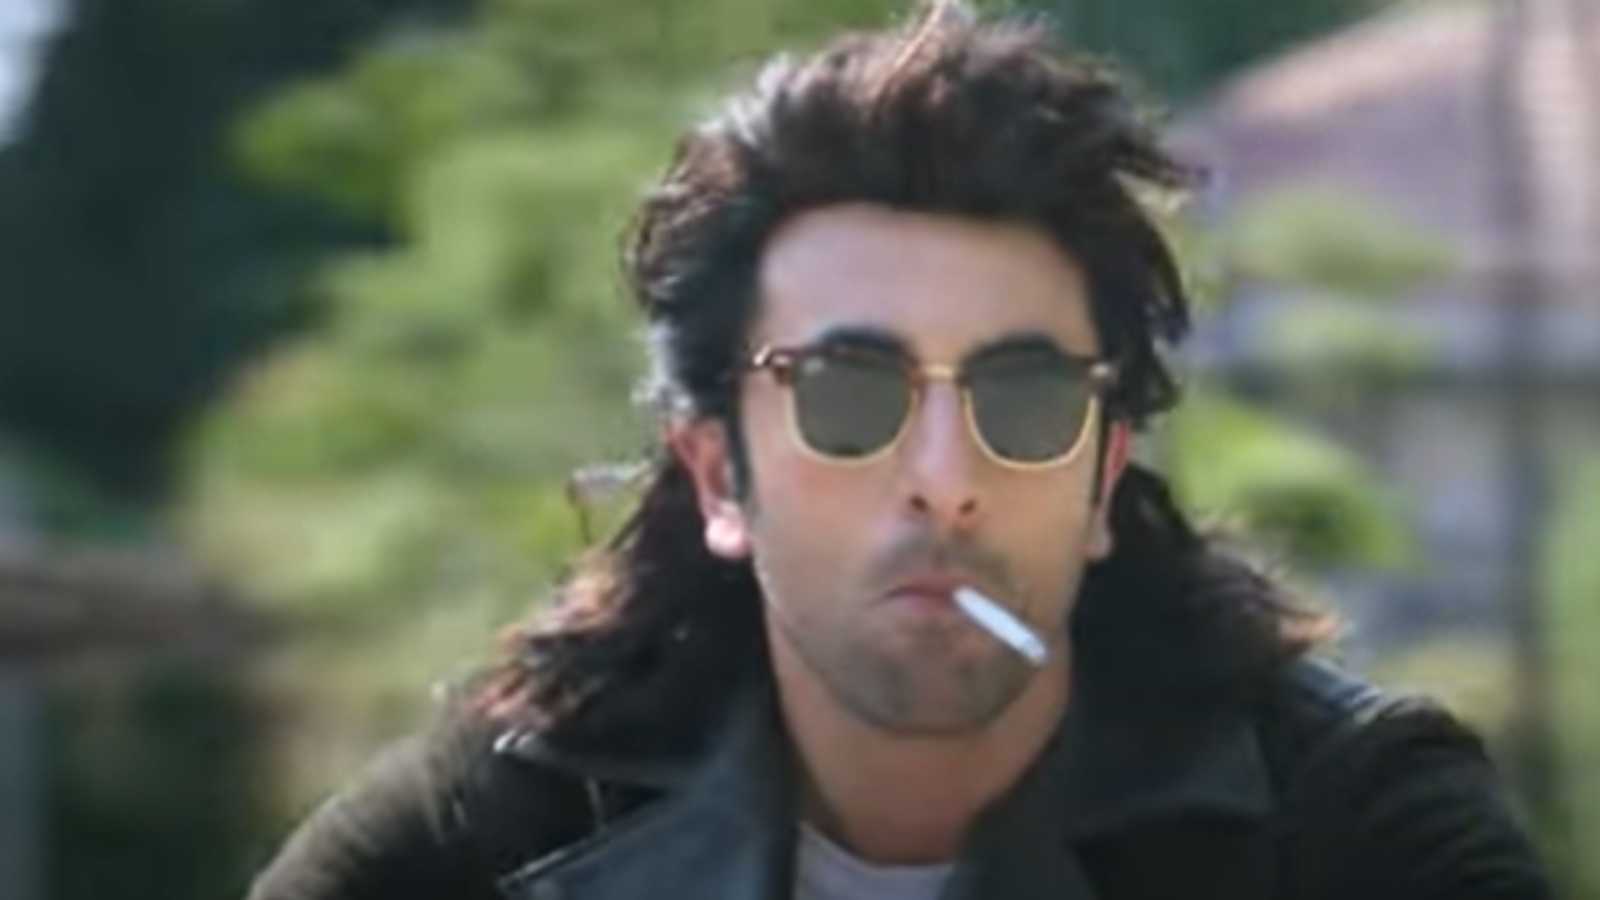 Animal Advance Booking: Ranbir Kapoor-Bobby Deol starrer eyes Rs 50 crore opening, sells over 2 lakh tickets so far